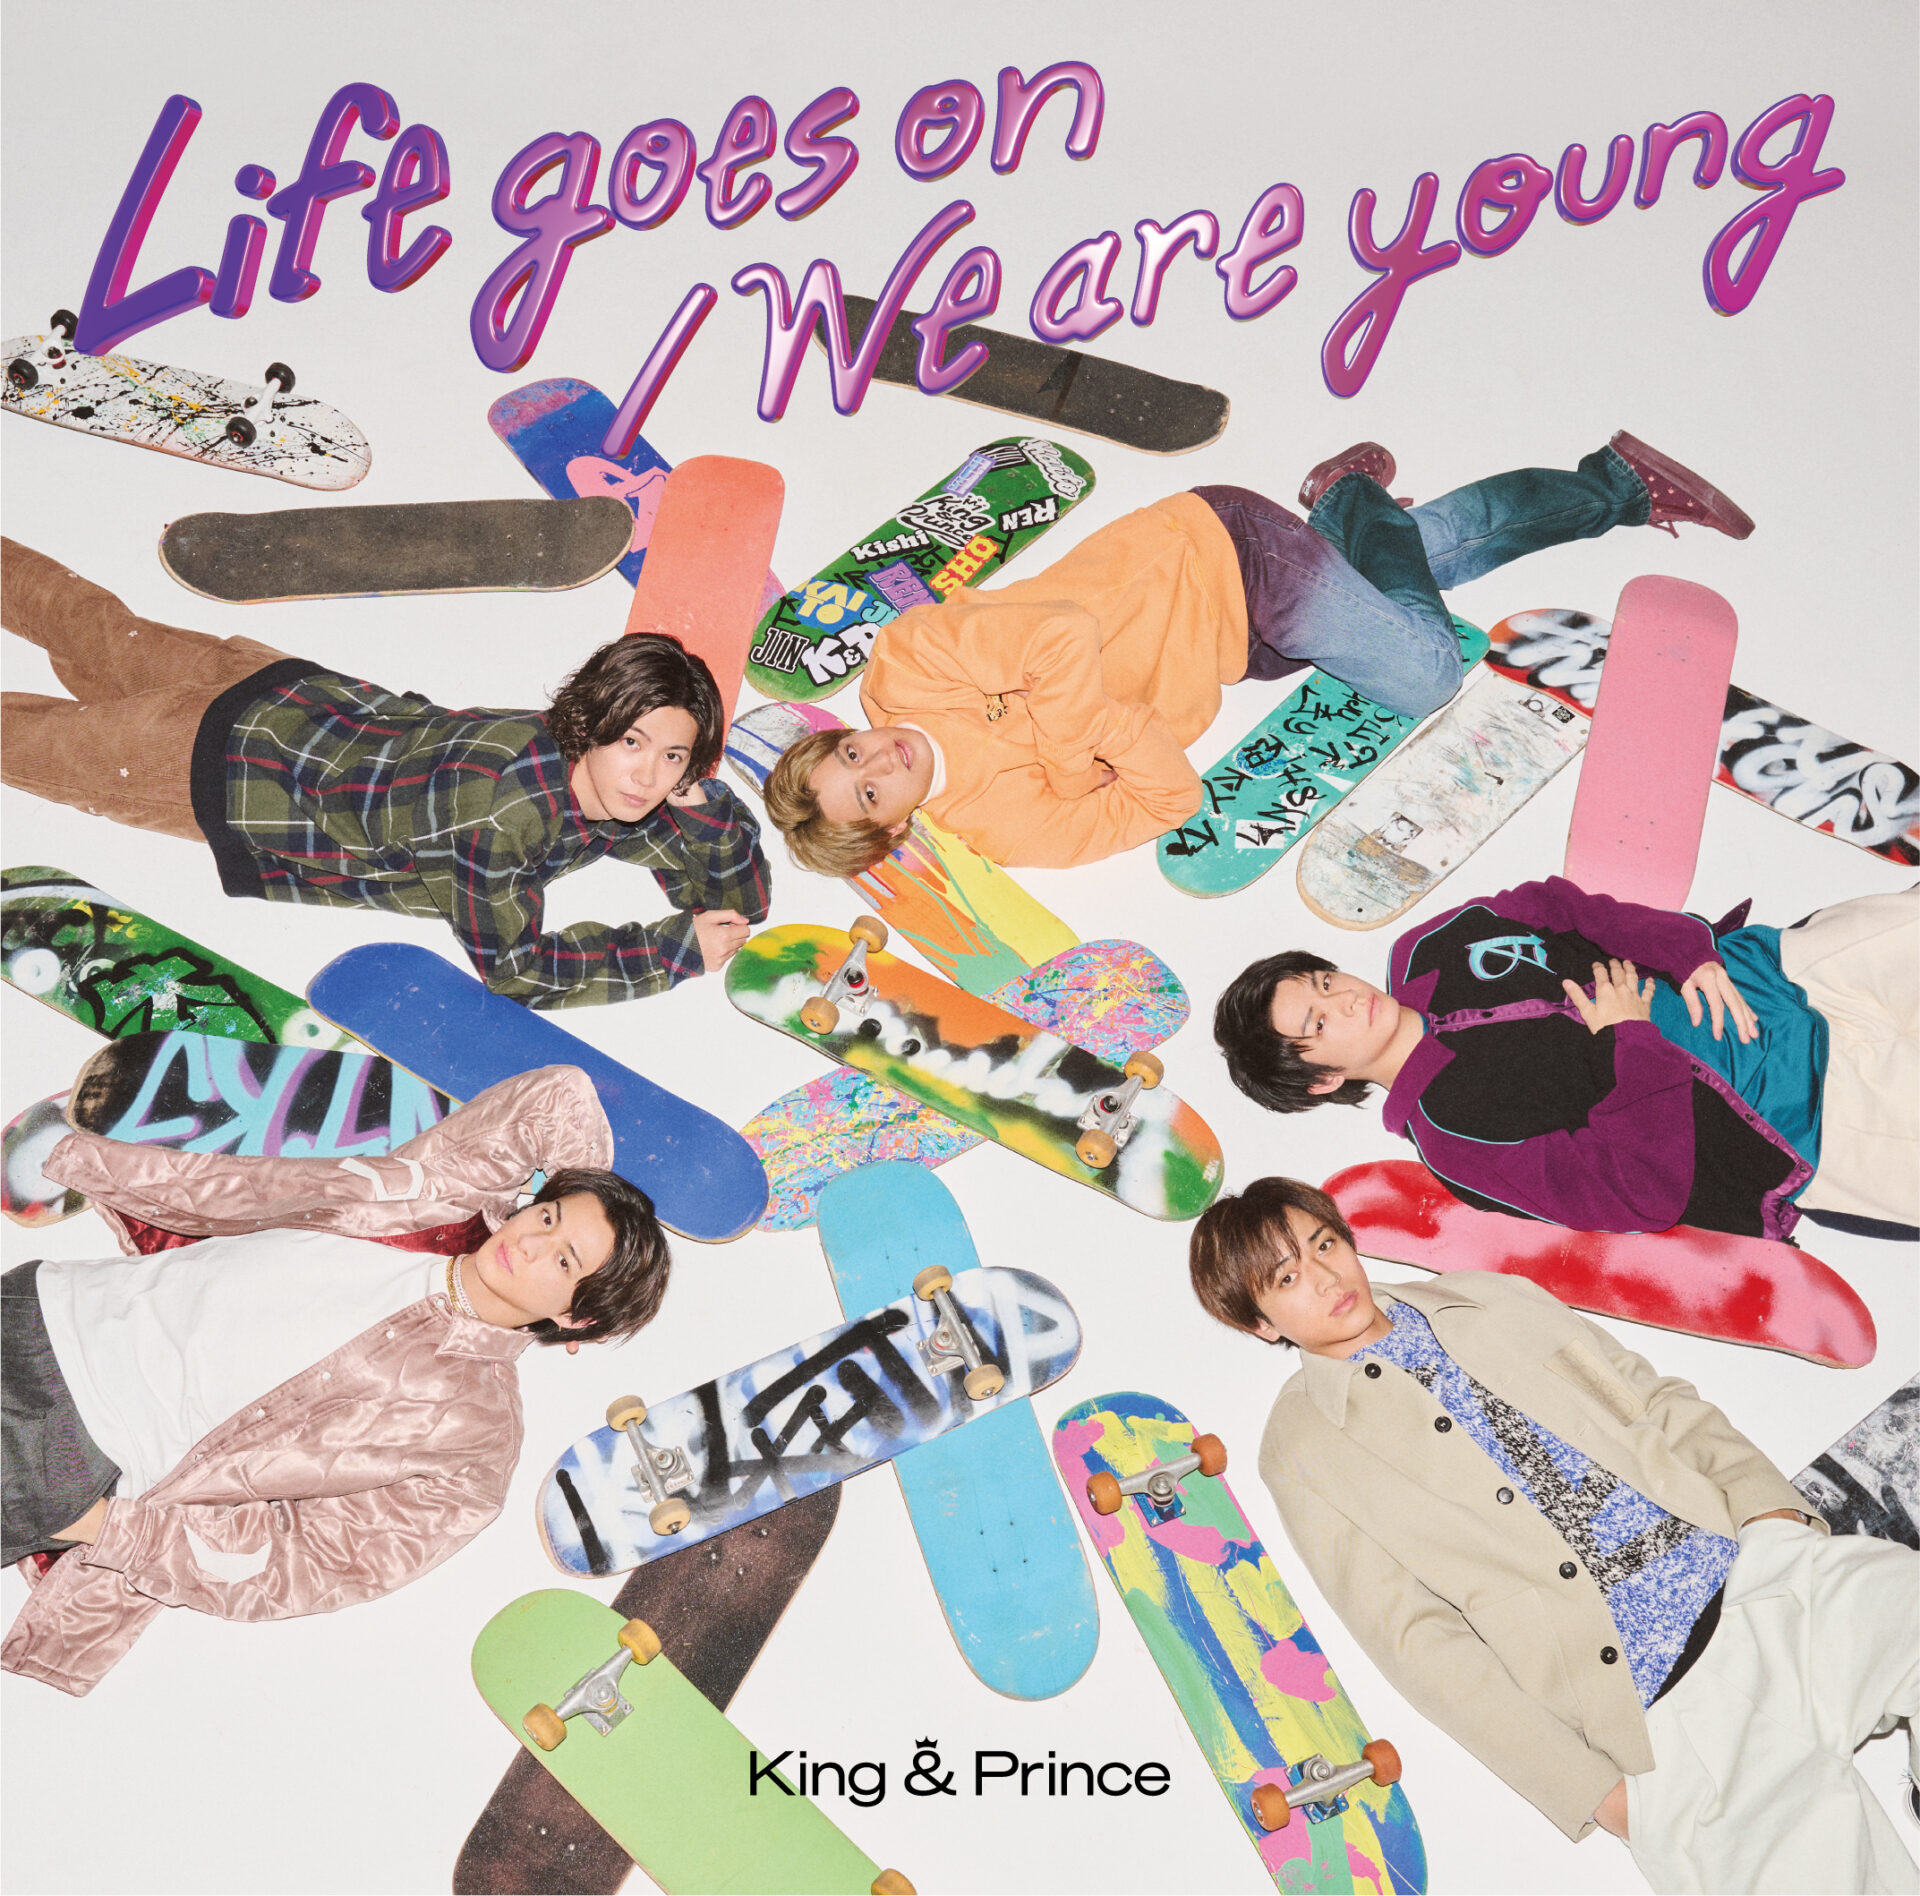 『Life goes on / We are young』通常盤ジャケット